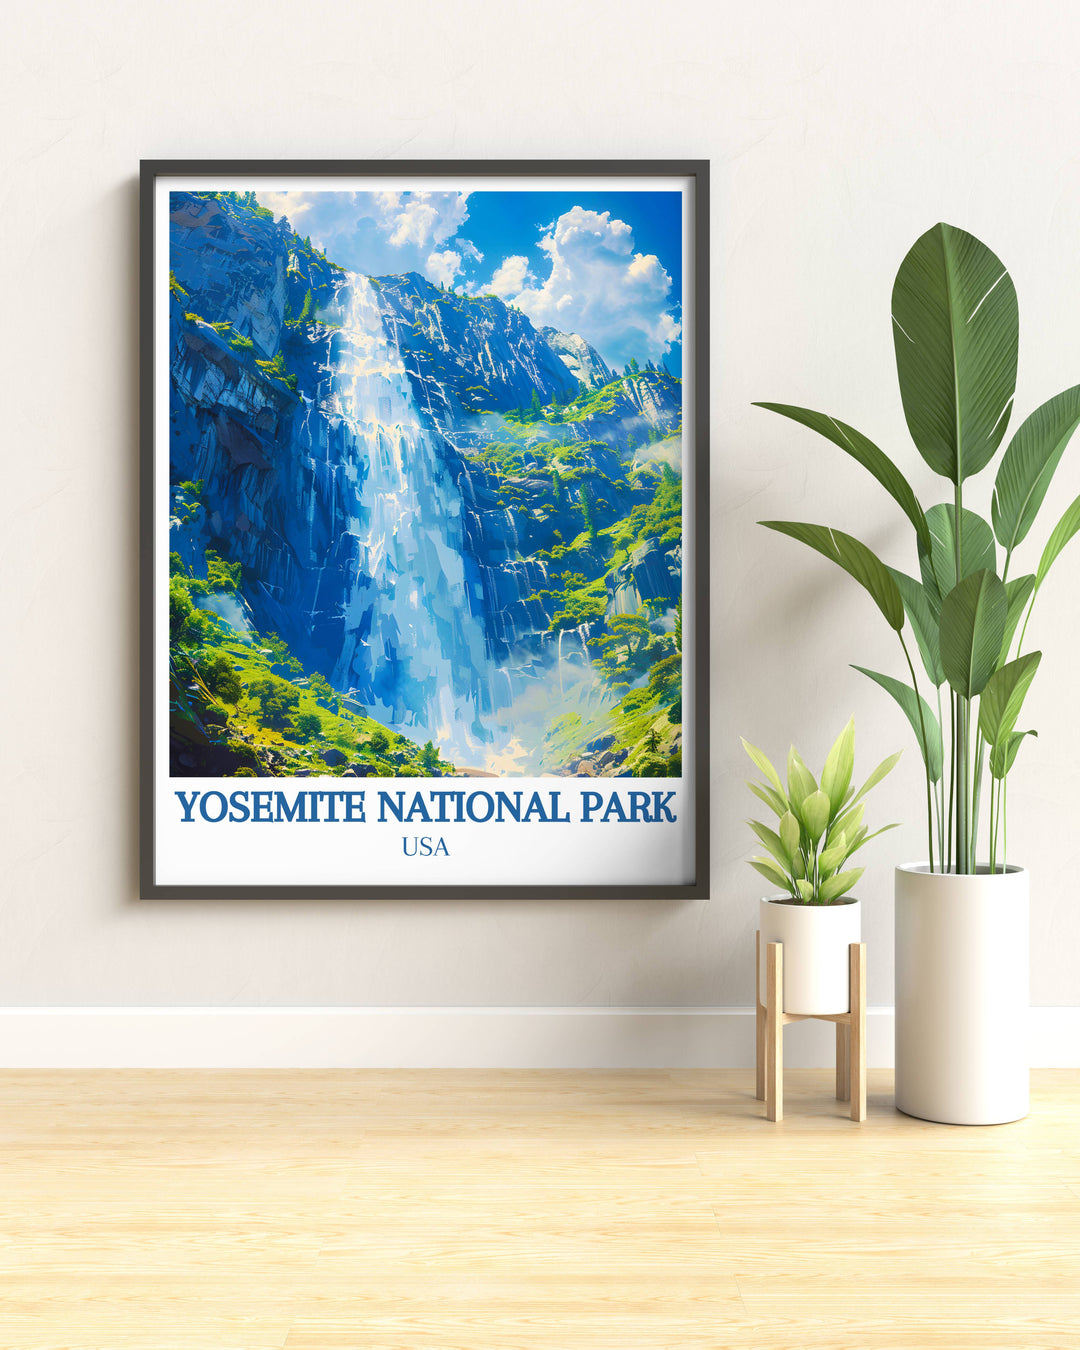 Yosemite National Park framed art featuring detailed depictions of its natural landscapes, making a thoughtful gift for travelers and nature lovers.